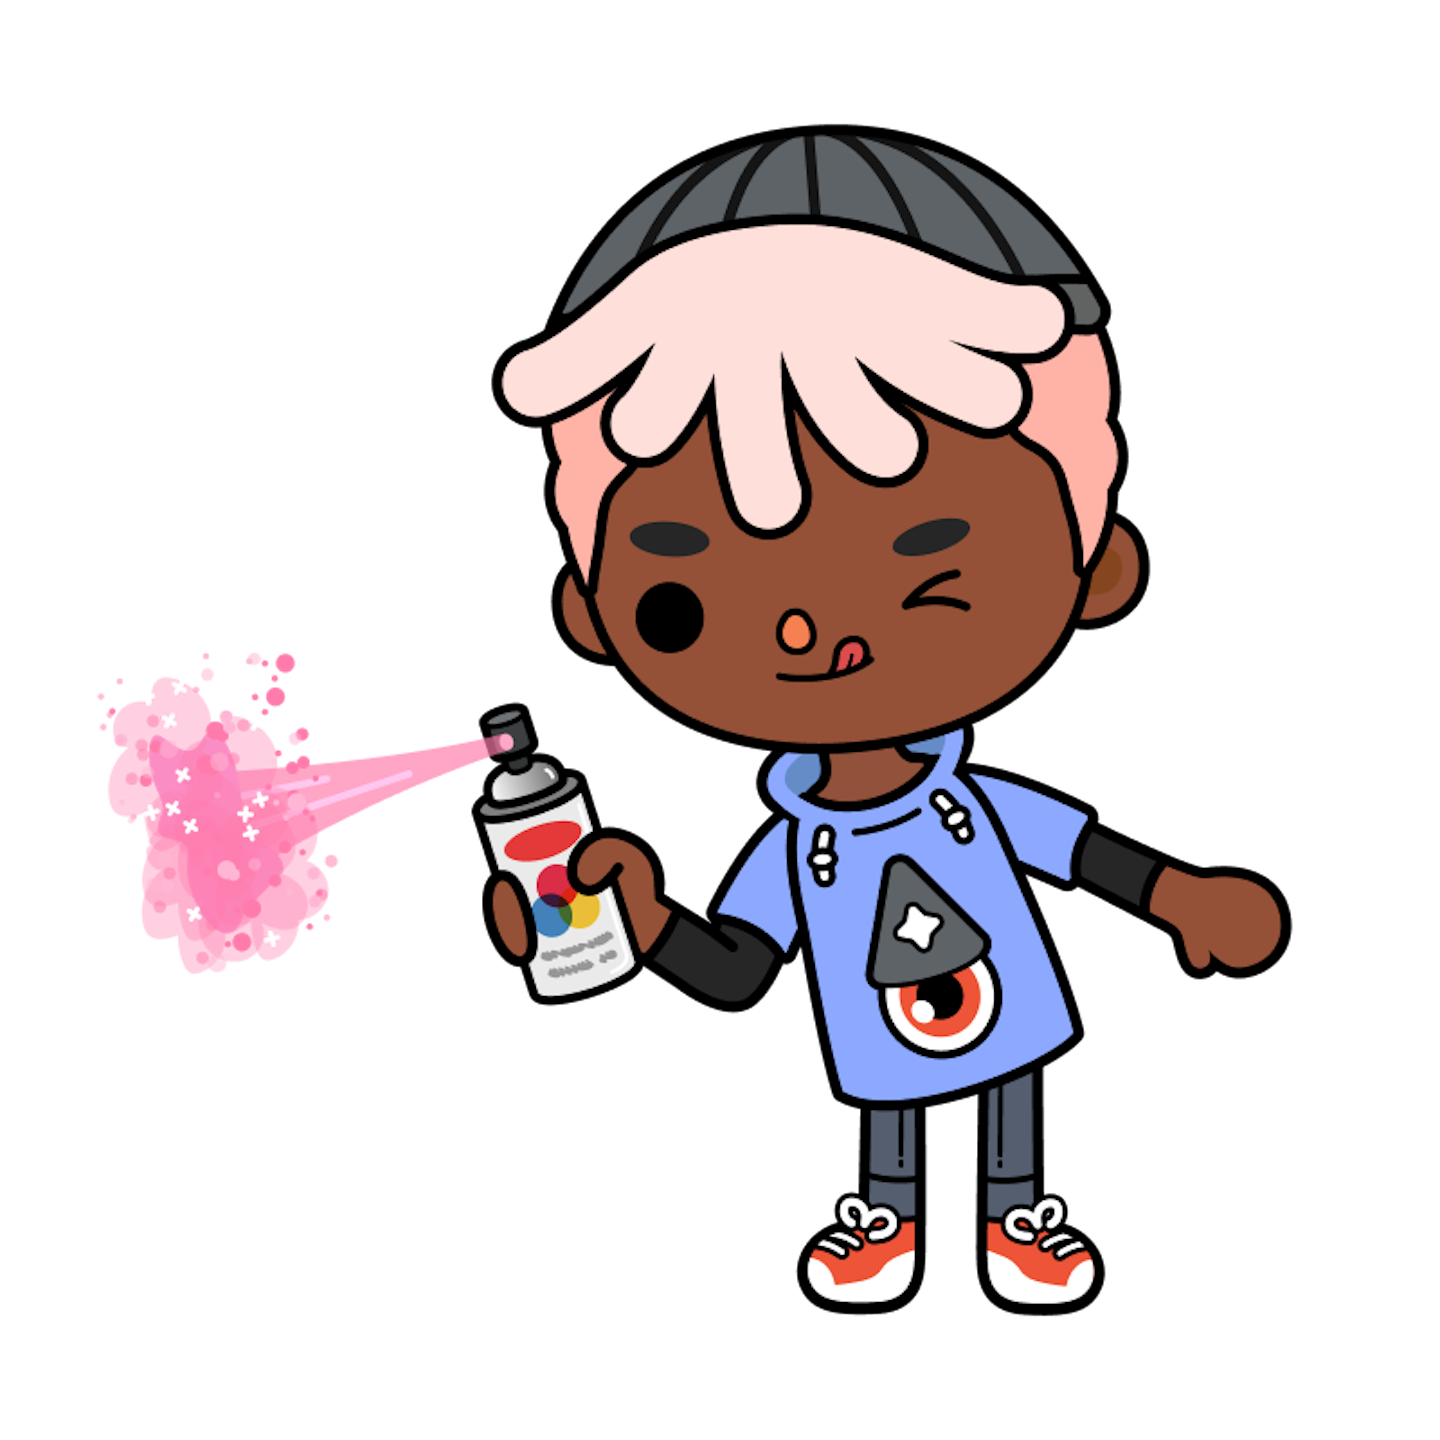 This is an image of Leon, a character from Toca Boca World, holding a spray can and spraying onto a surface